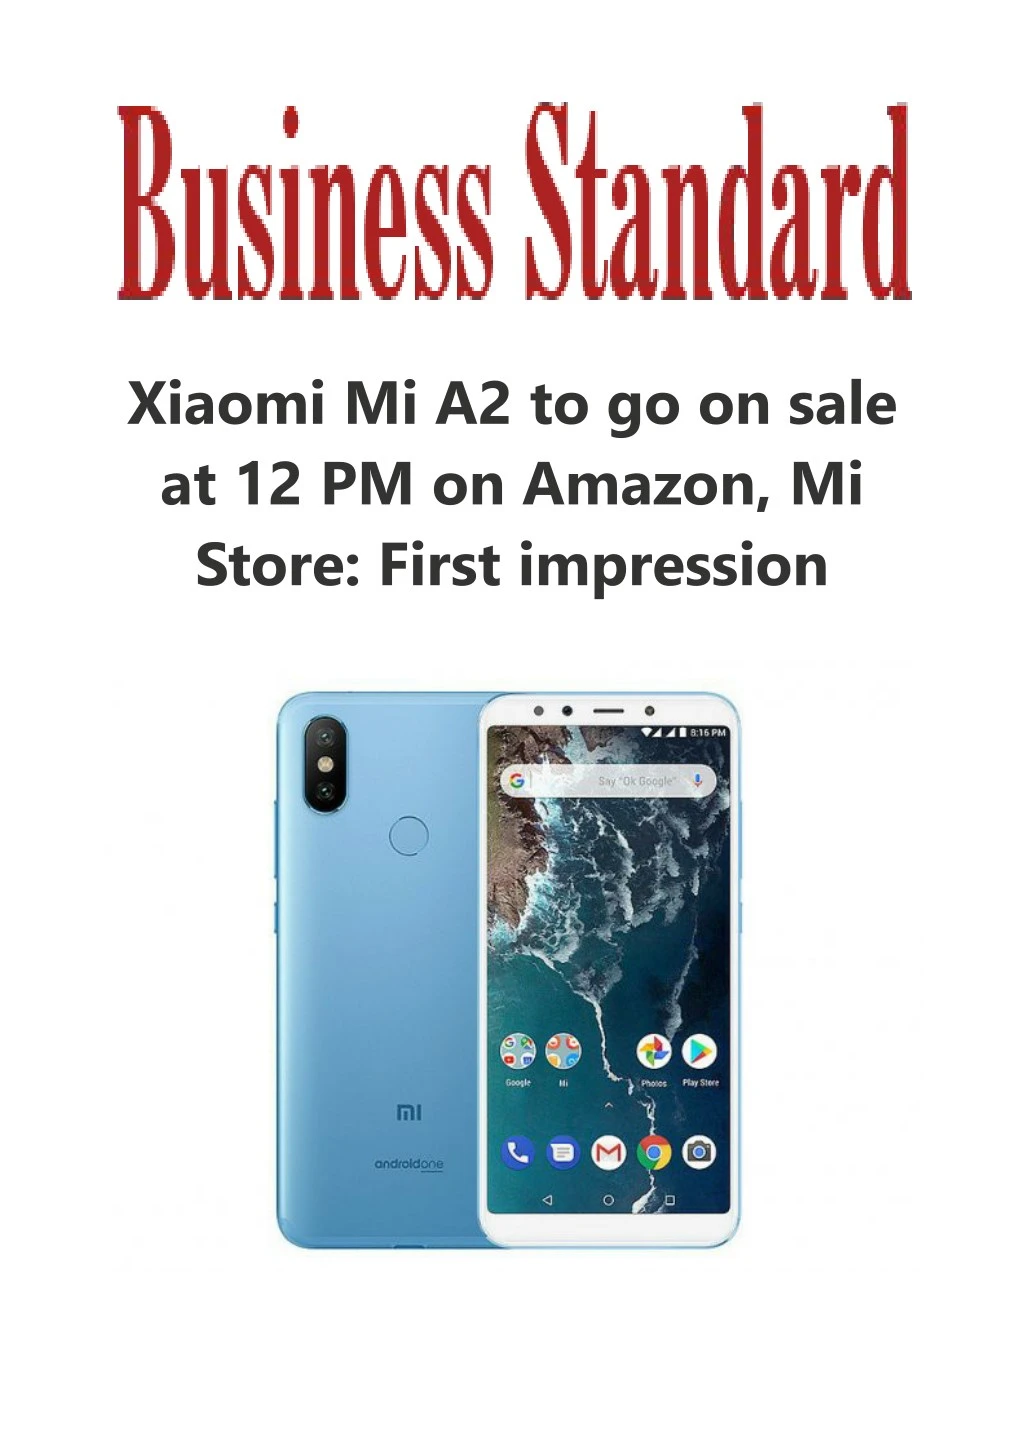 xiaomi mi a2 to go on sale at 12 pm on amazon